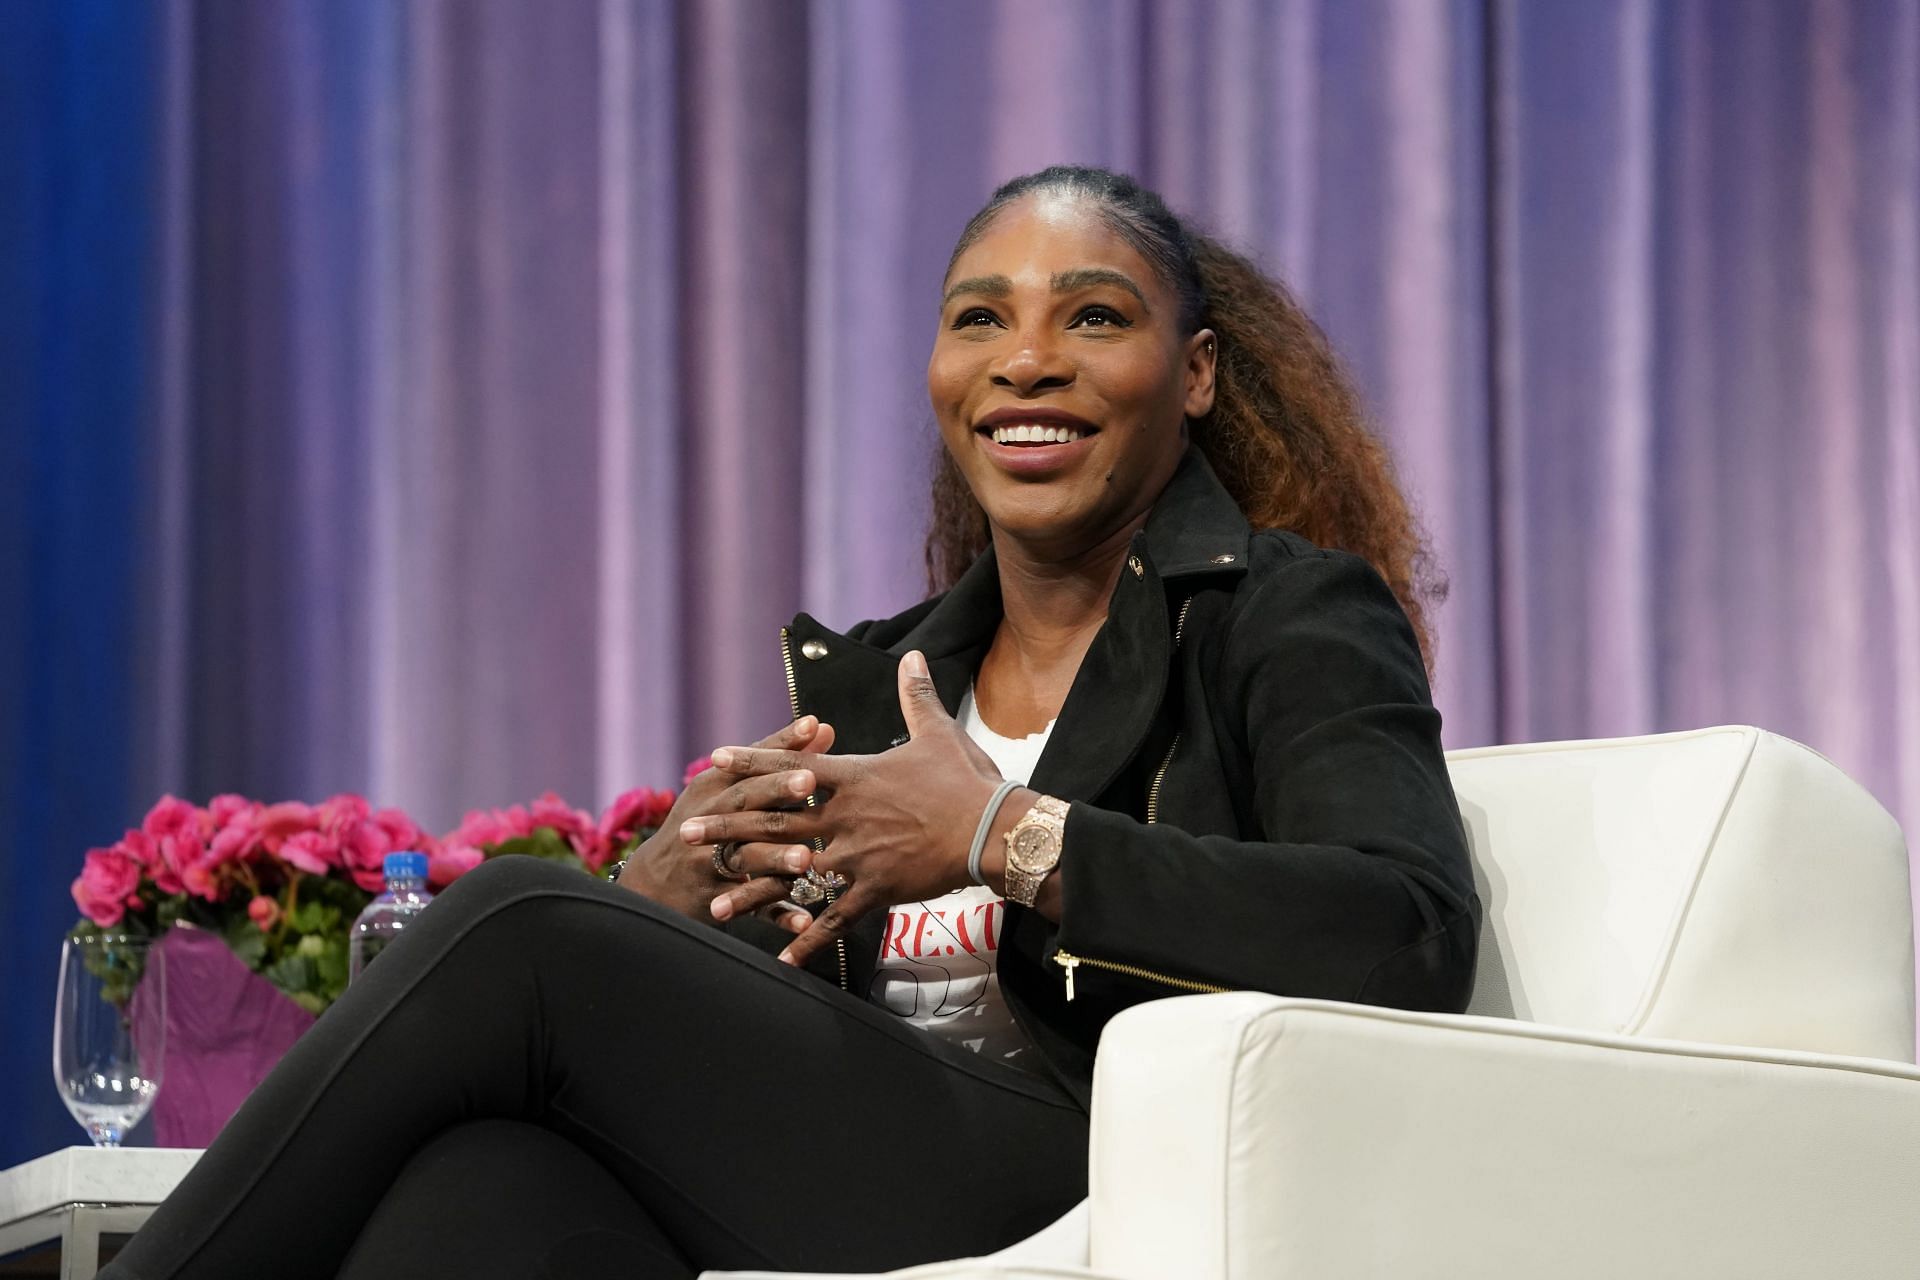 4 bold quotes by Serena Williams